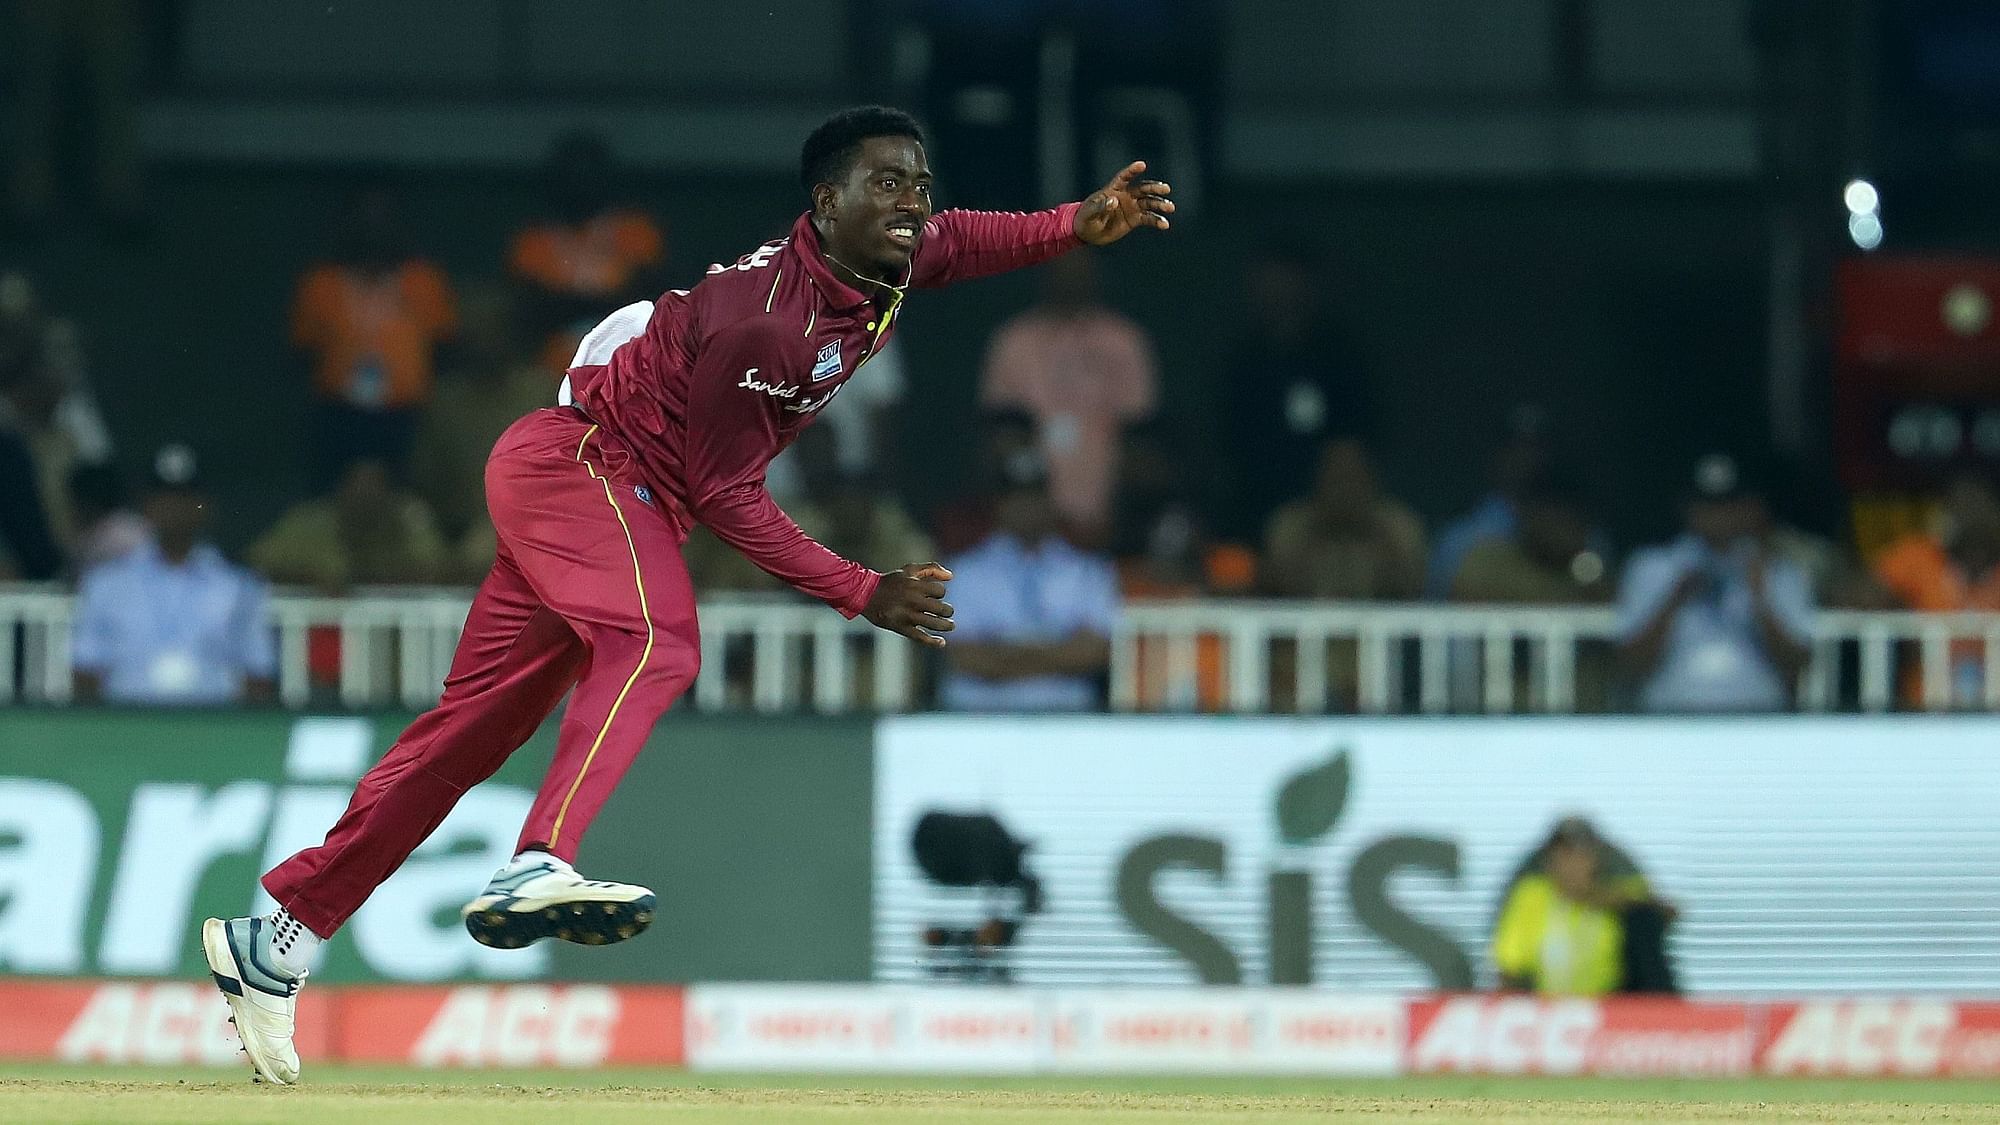 Hayden Walsh Jr. bowled an impressive 2/28 in the second T20I between India and West Indies.